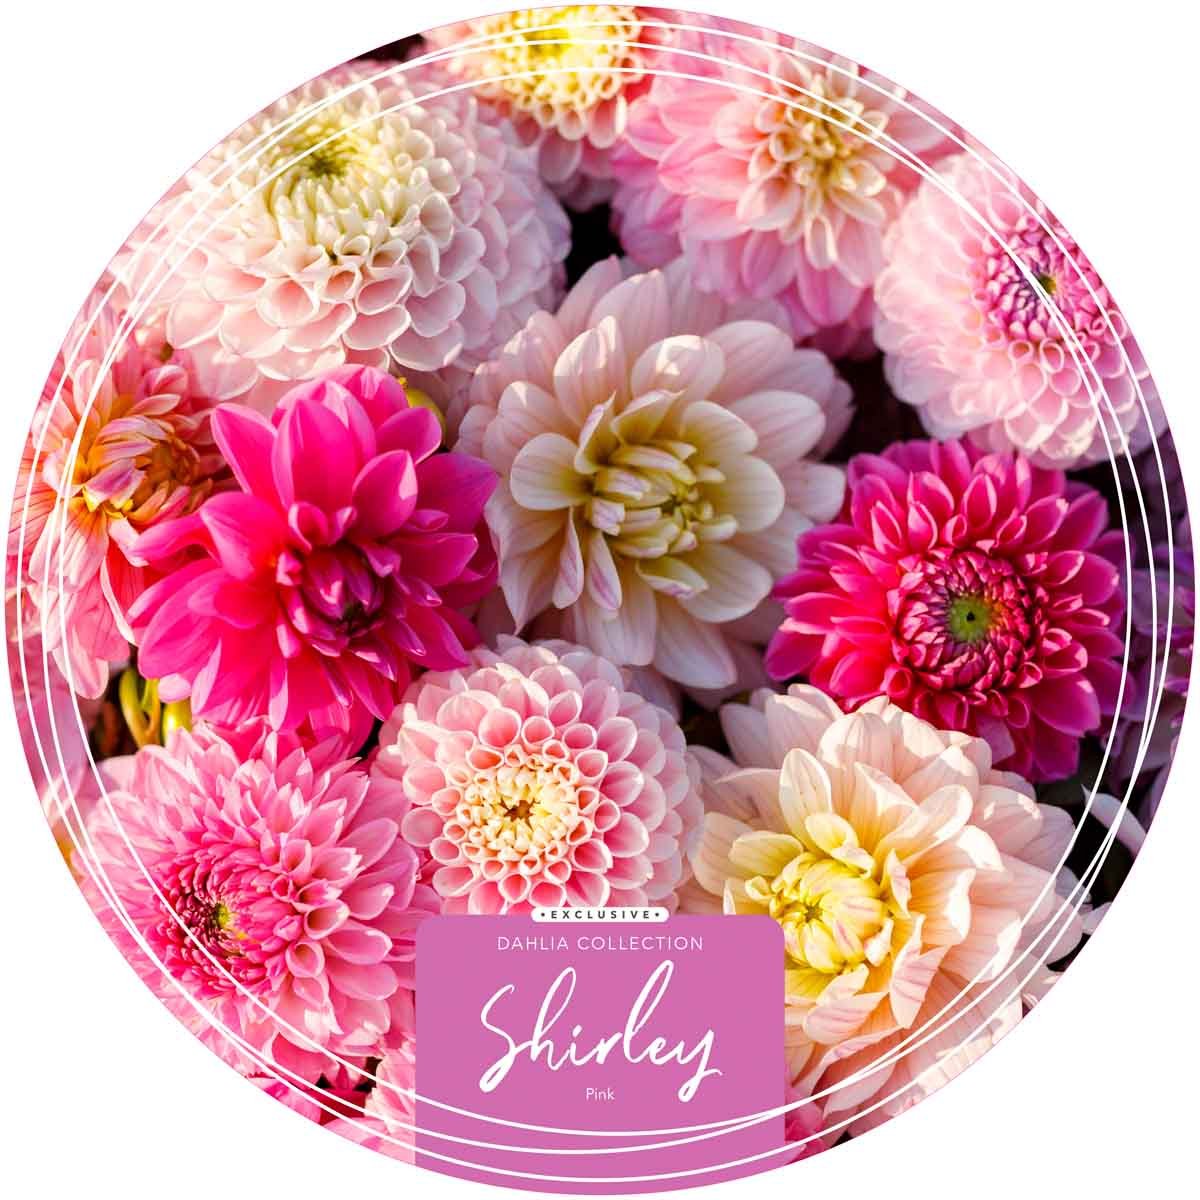 Exclusive Collection Dahlias 'Shirley' - Pink